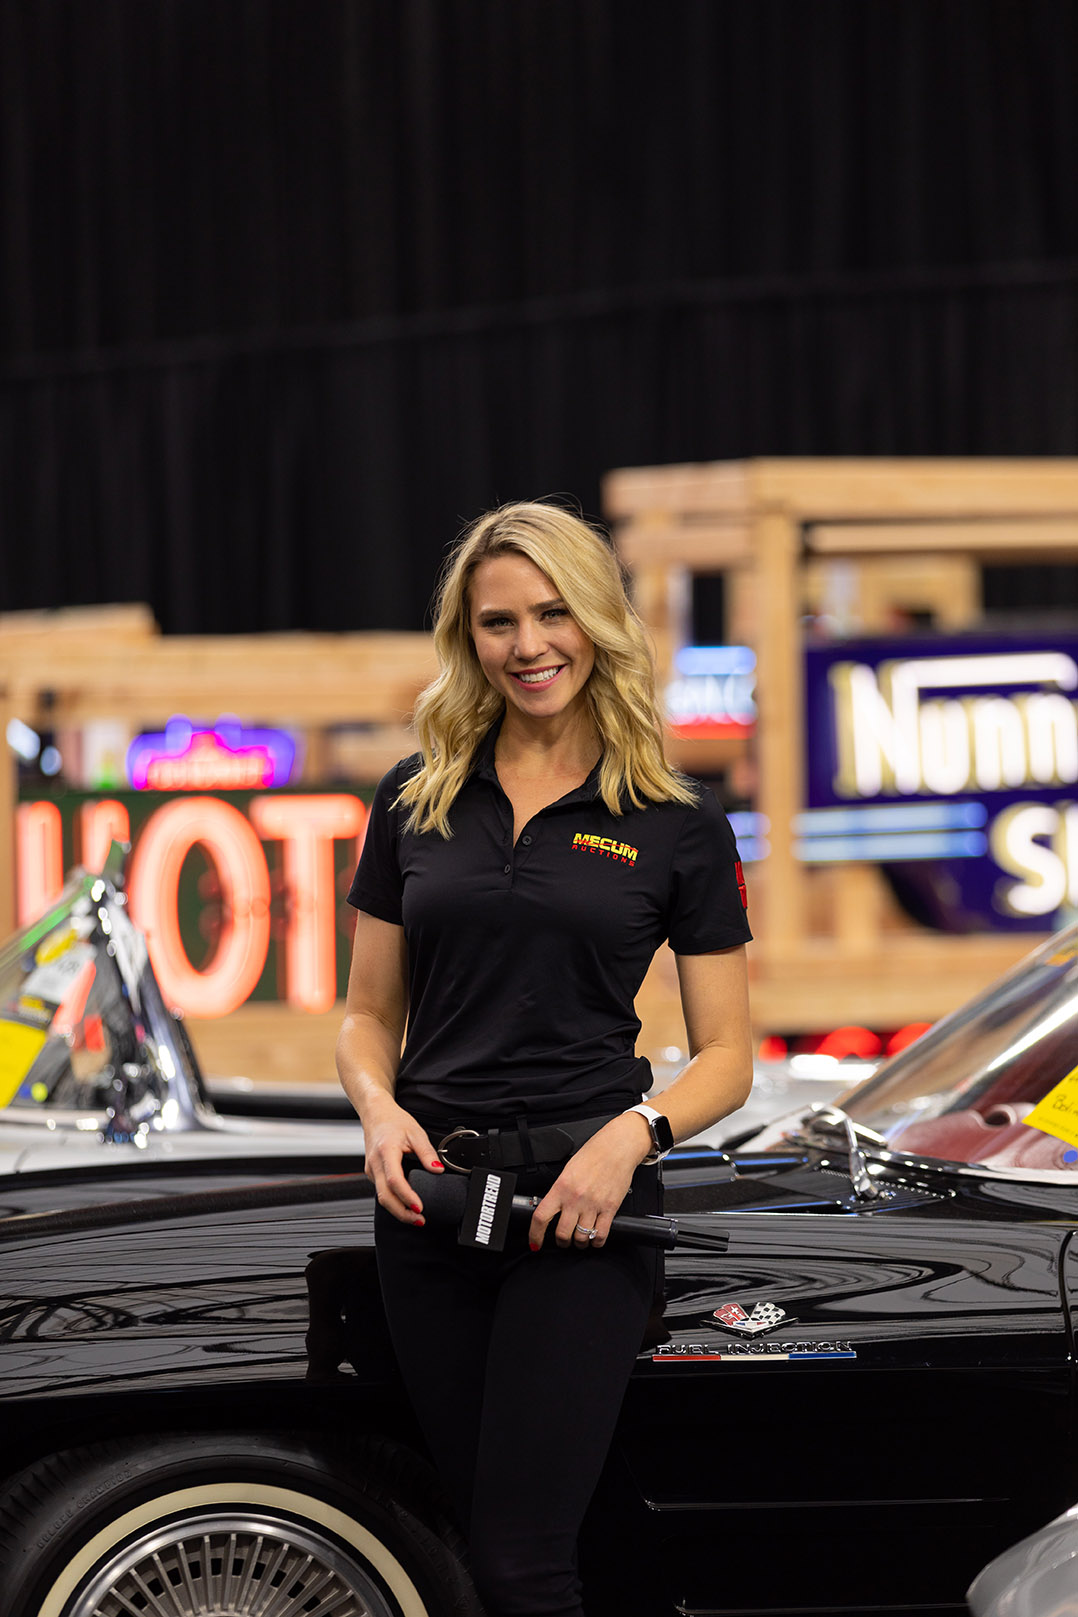 TV crews will be at home for Mecum Auctions broadcasts at State